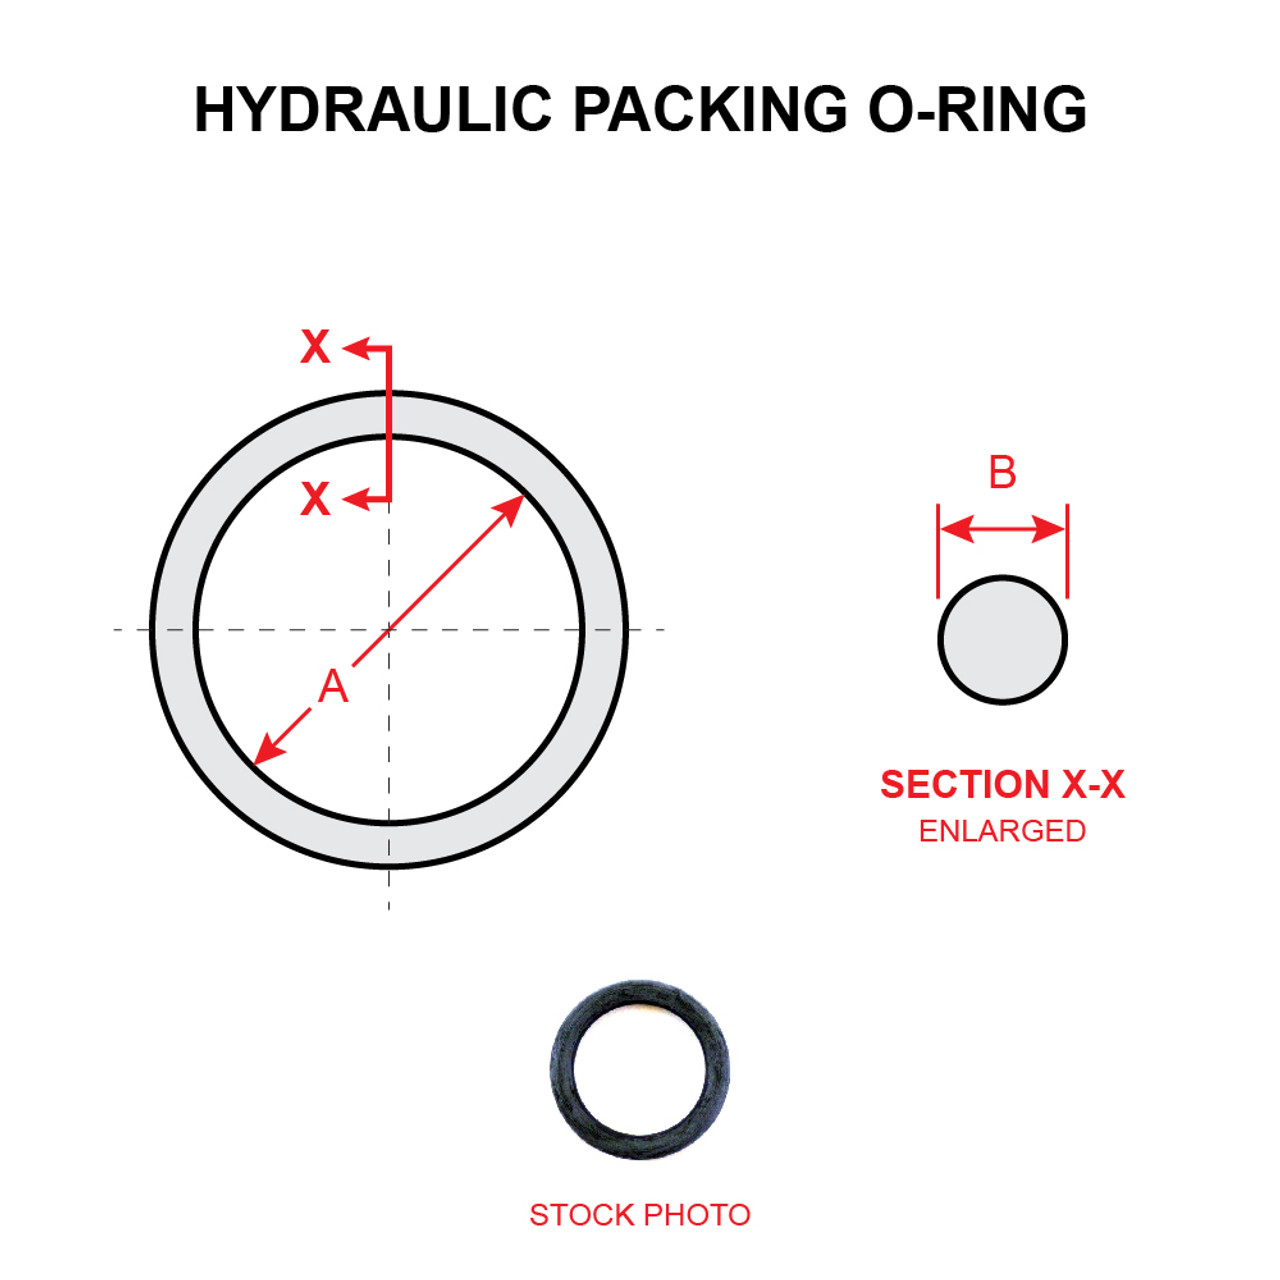 MS28775-219   HYDRAULIC PACKING O-RING